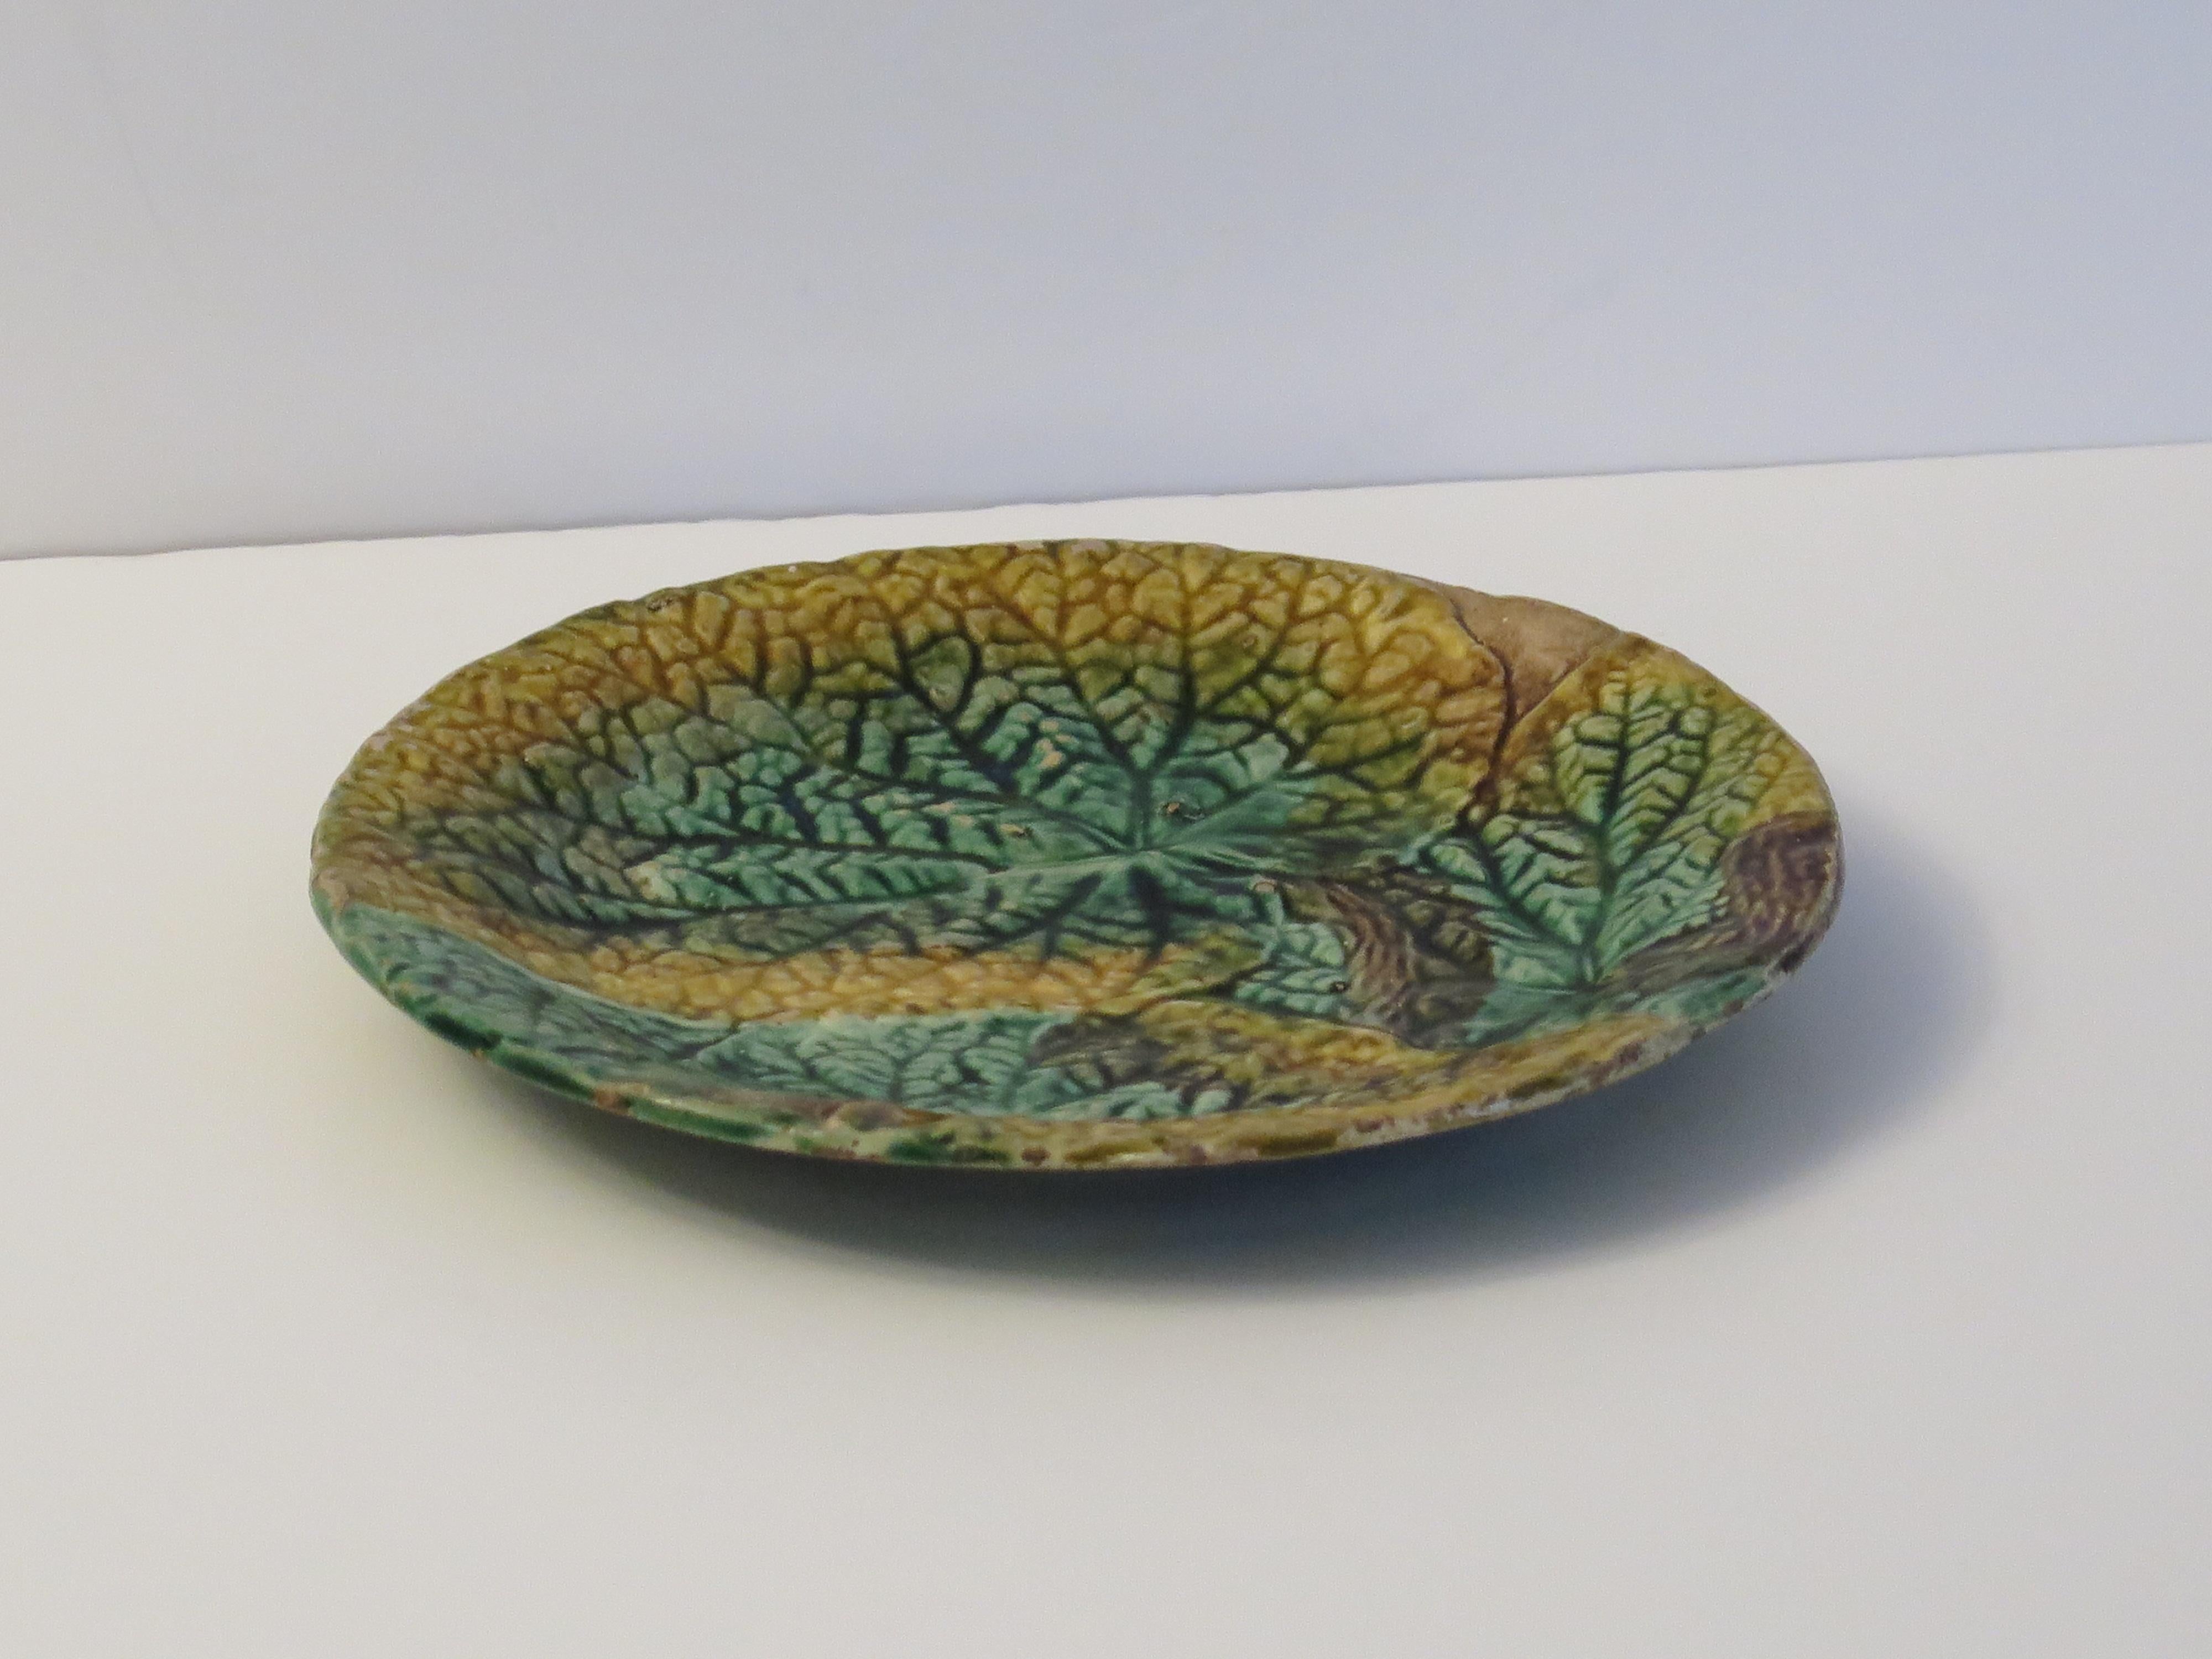 19th Century George Jones antique Majolica Plate in Begonia Leaf pattern, Circa 1870 For Sale